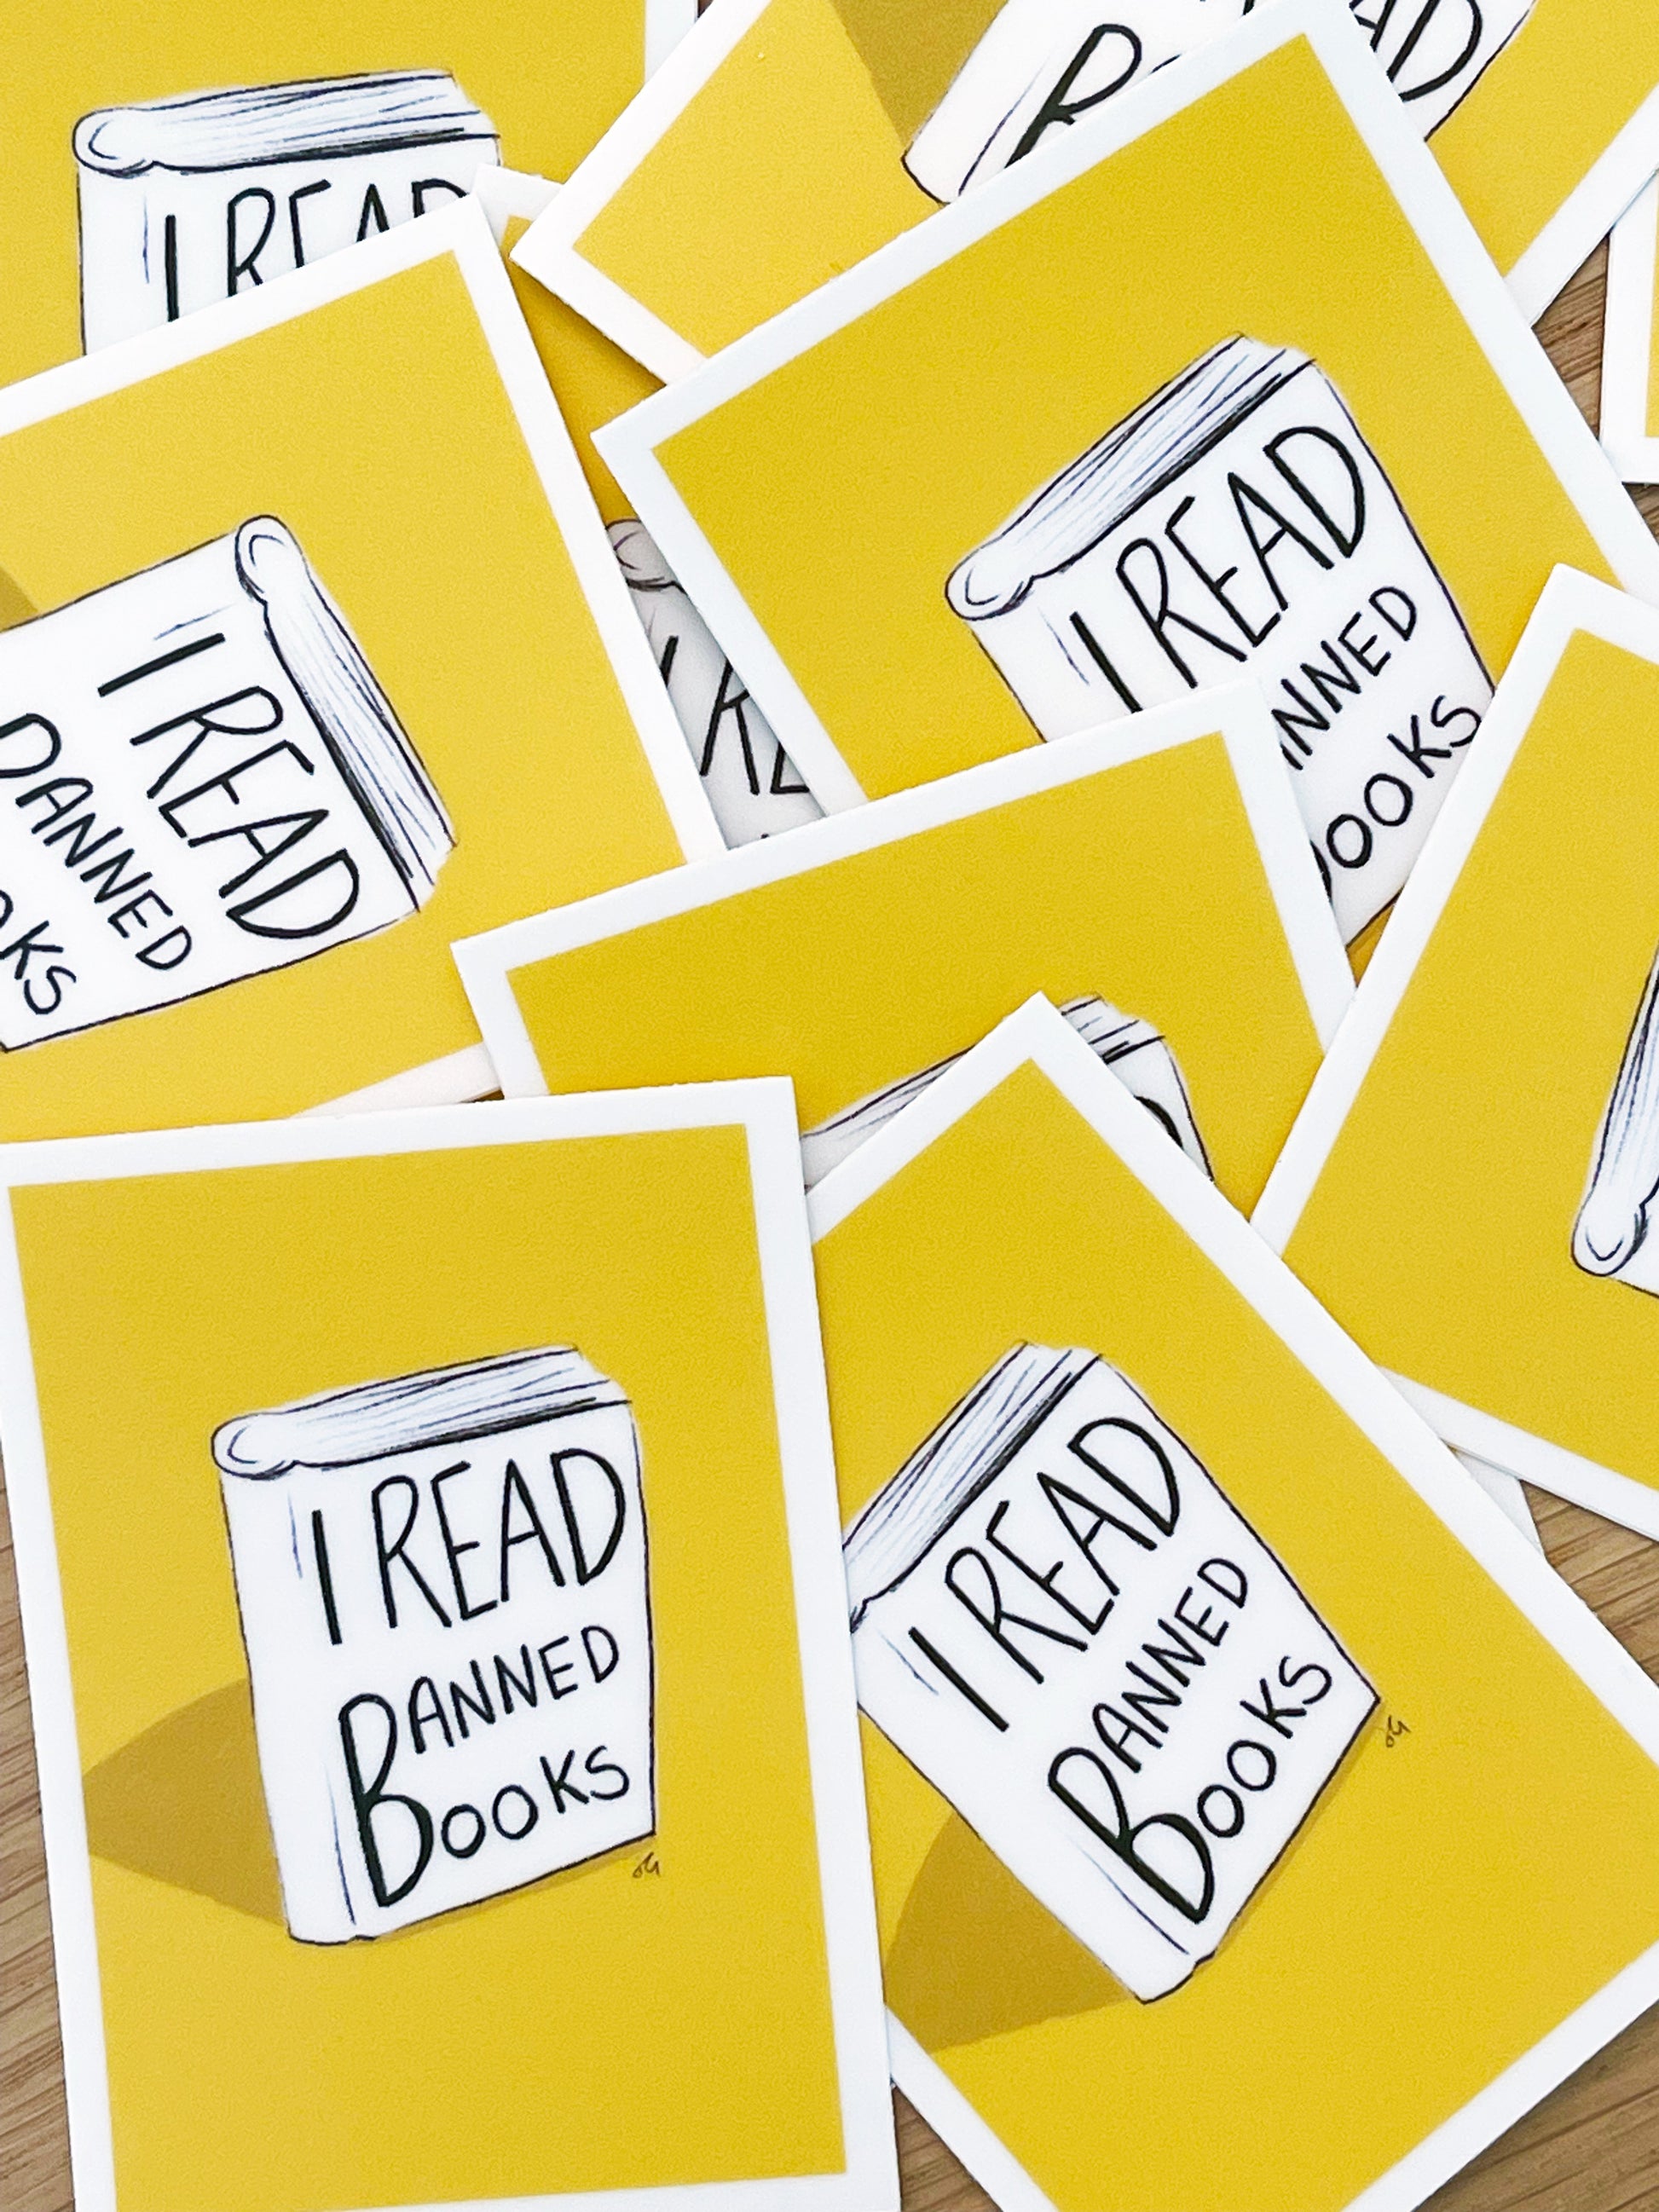 A pile stickers that has, I read banned books written on a illustrated book with a yellow background